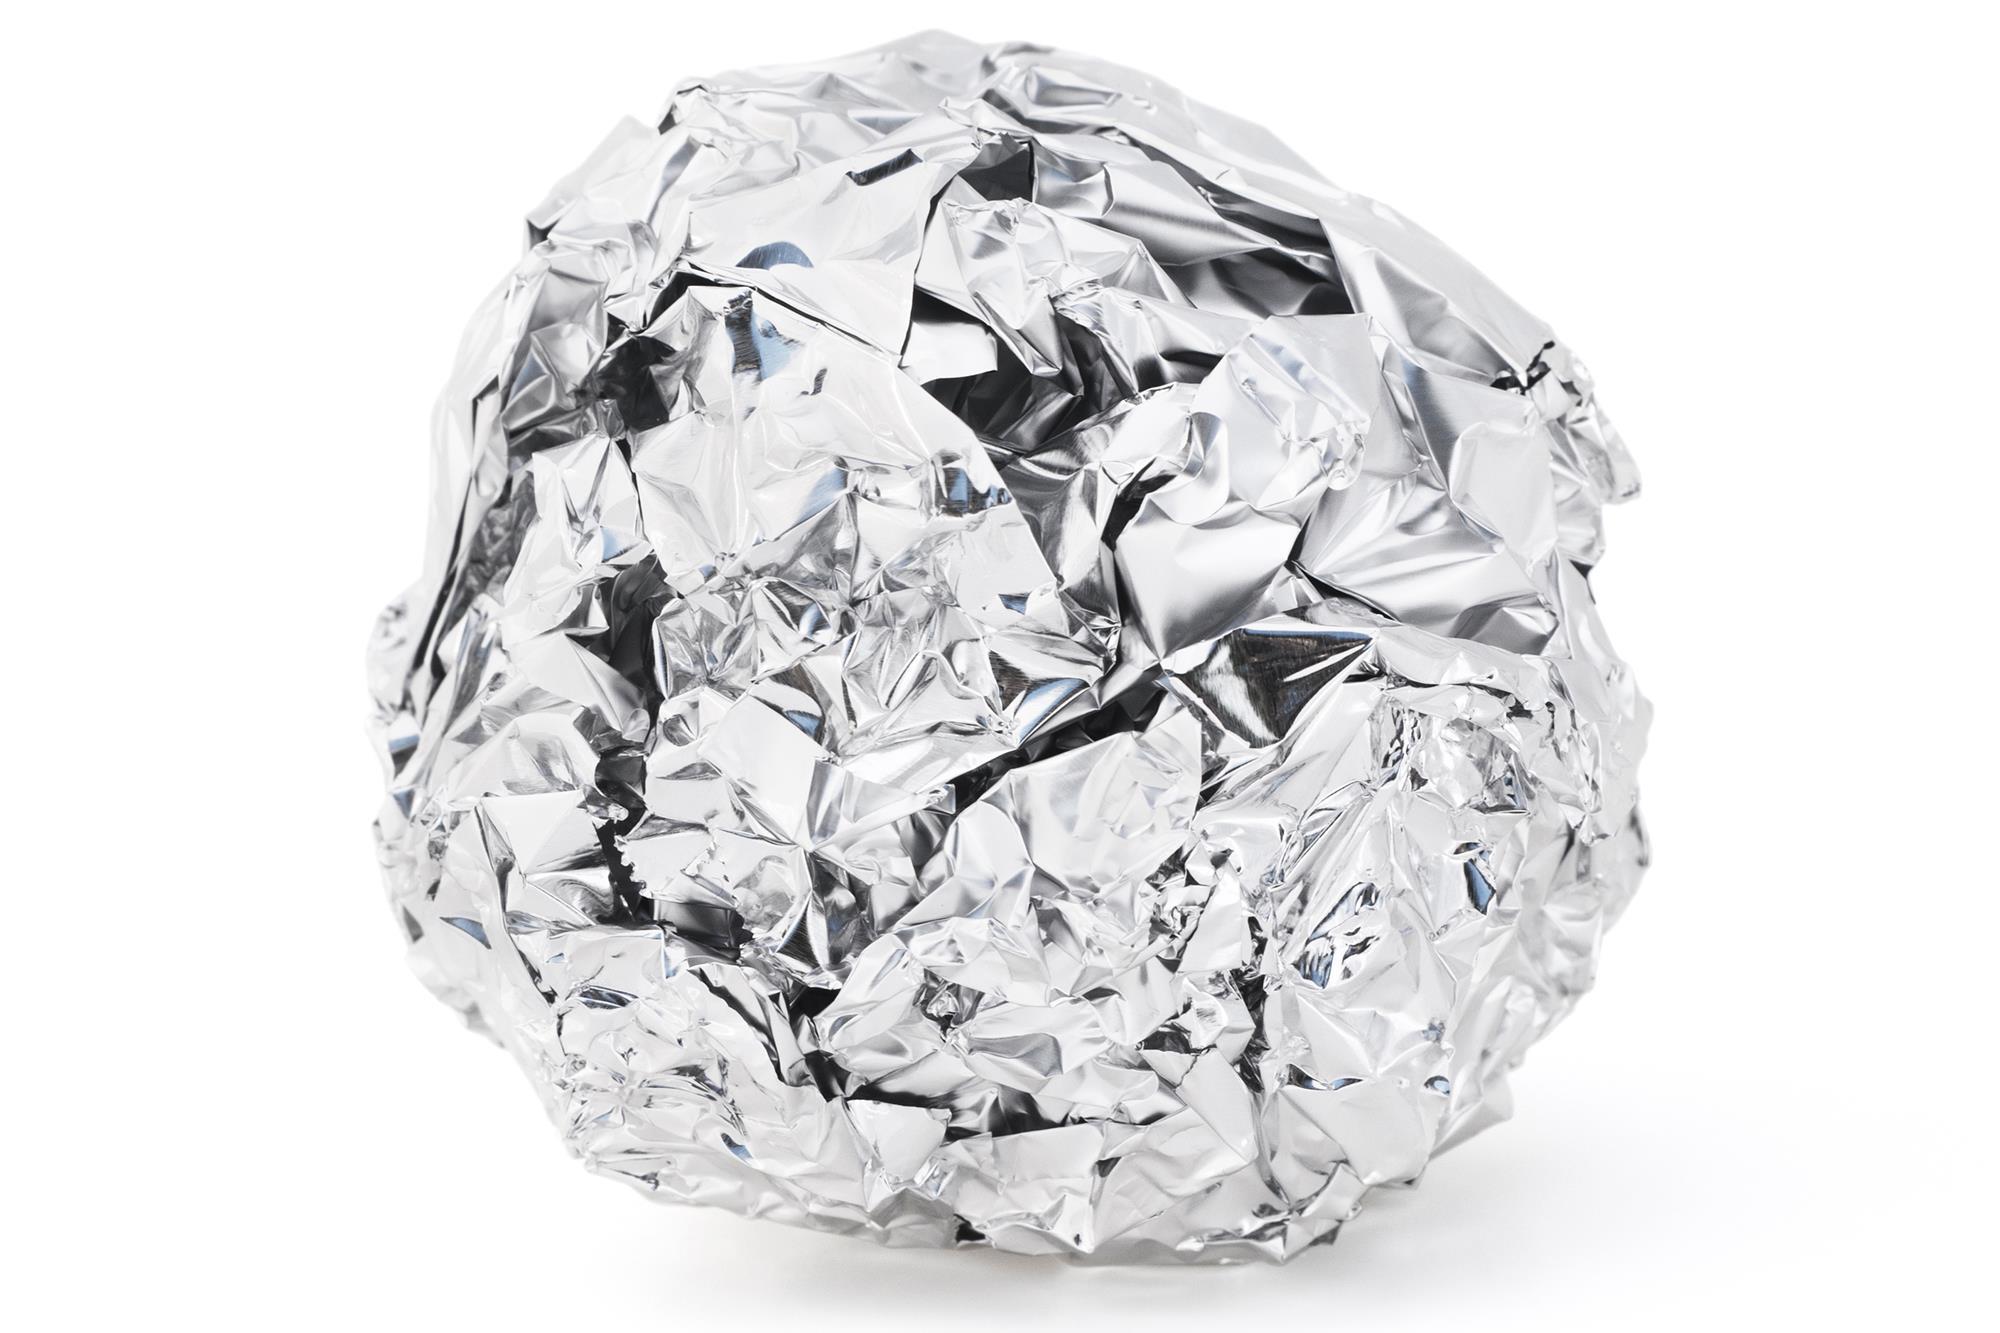 Is Aluminum Foil Recyclable? - Everyday Recycler